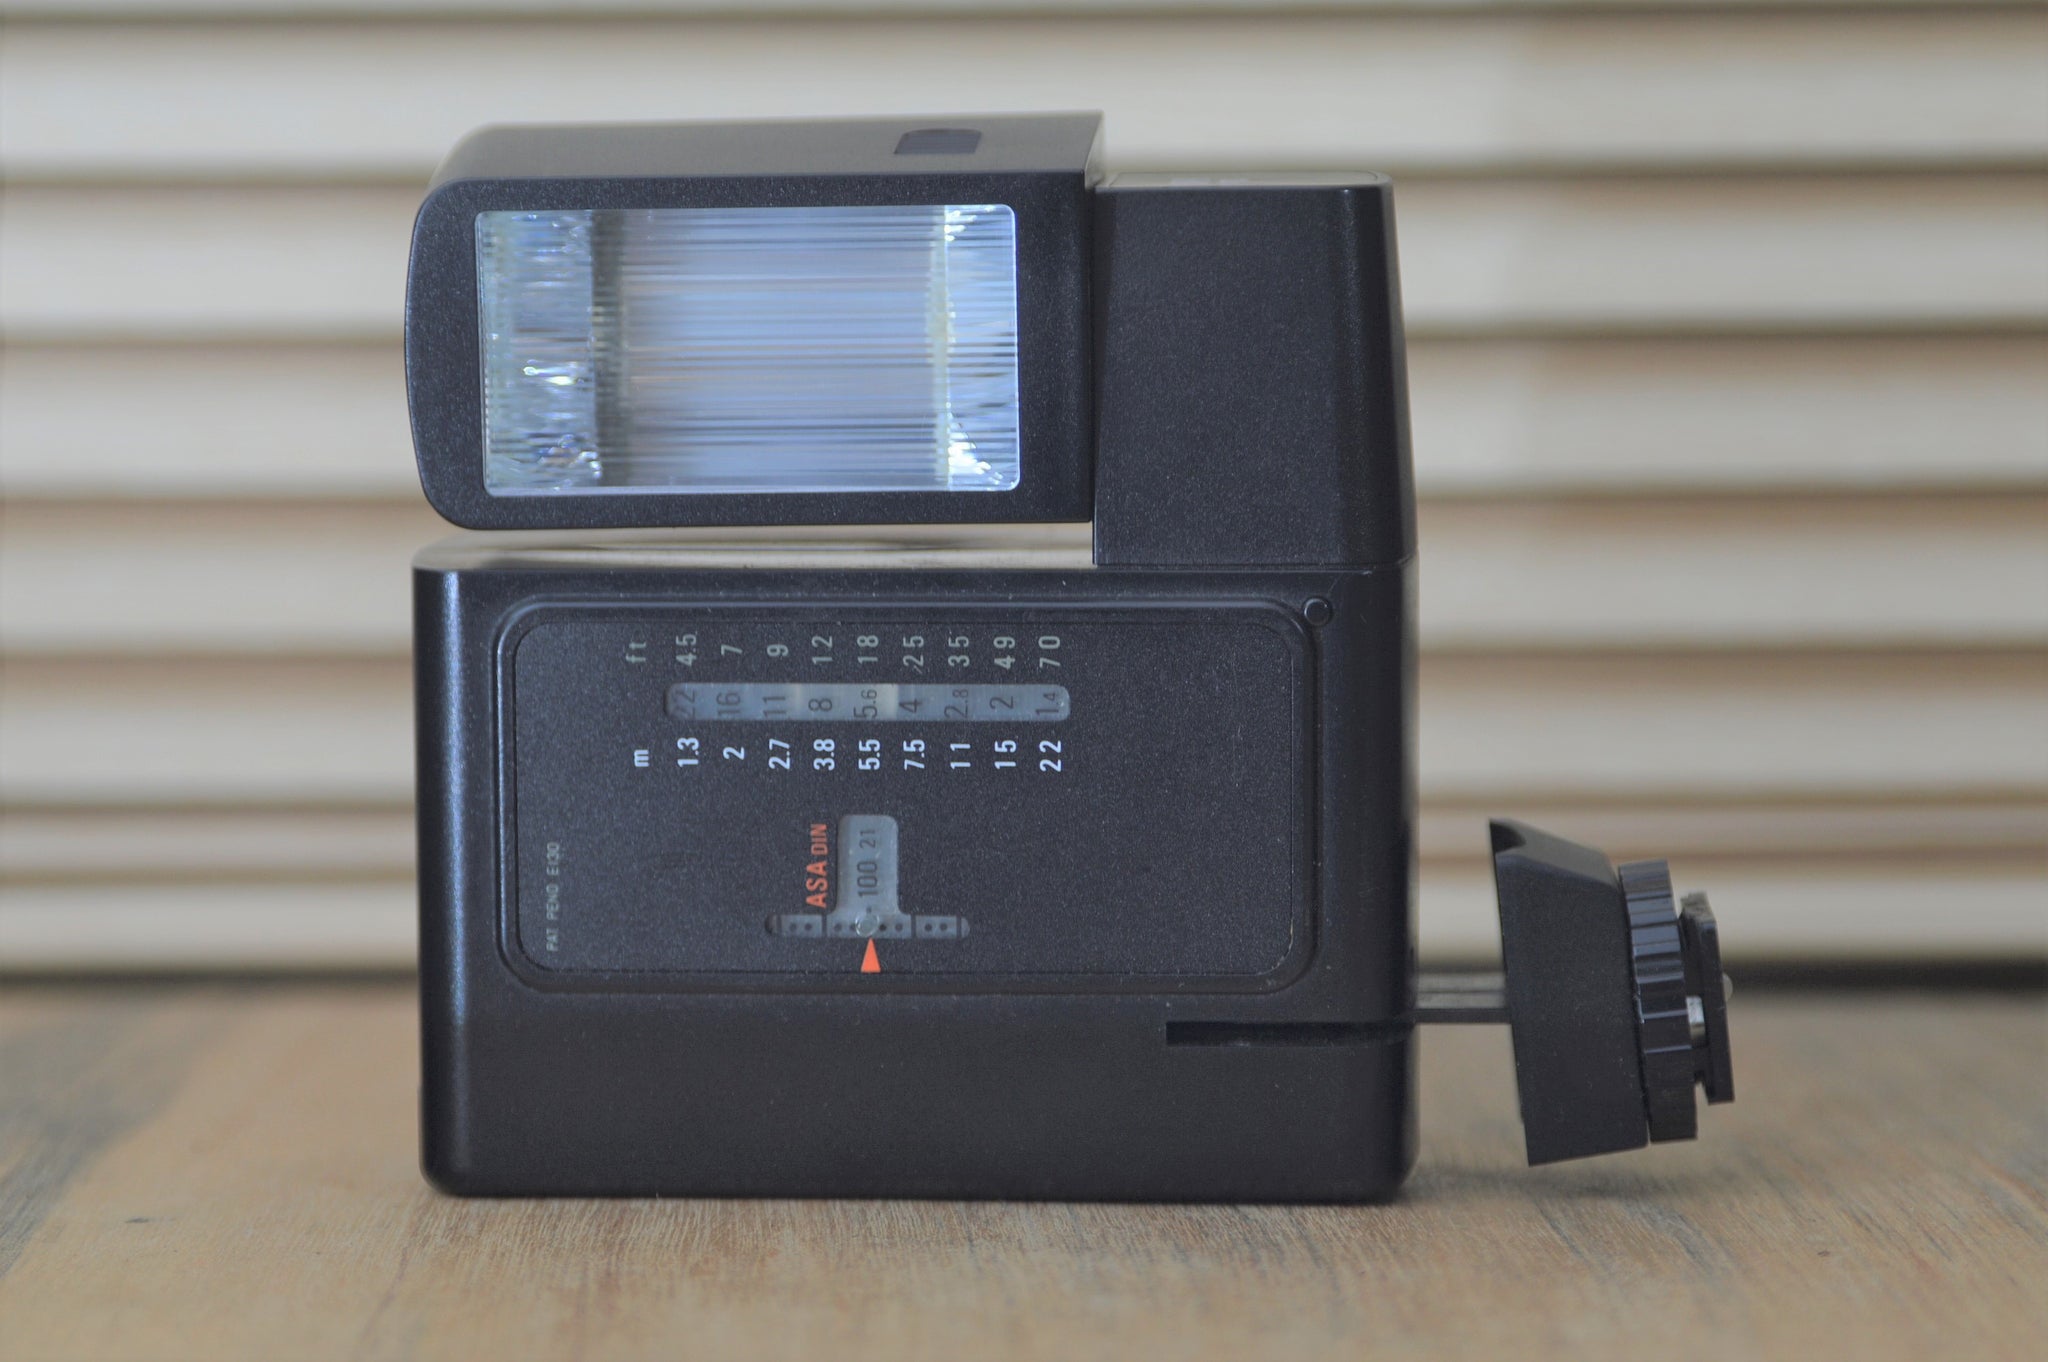 Sunpak MX130 Universal Flash unit. Great Bounce flash unit and surprisingly powerful for its size ideal flash unit for your vintage Kit - RewindCameras quality vintage cameras, fully tested a